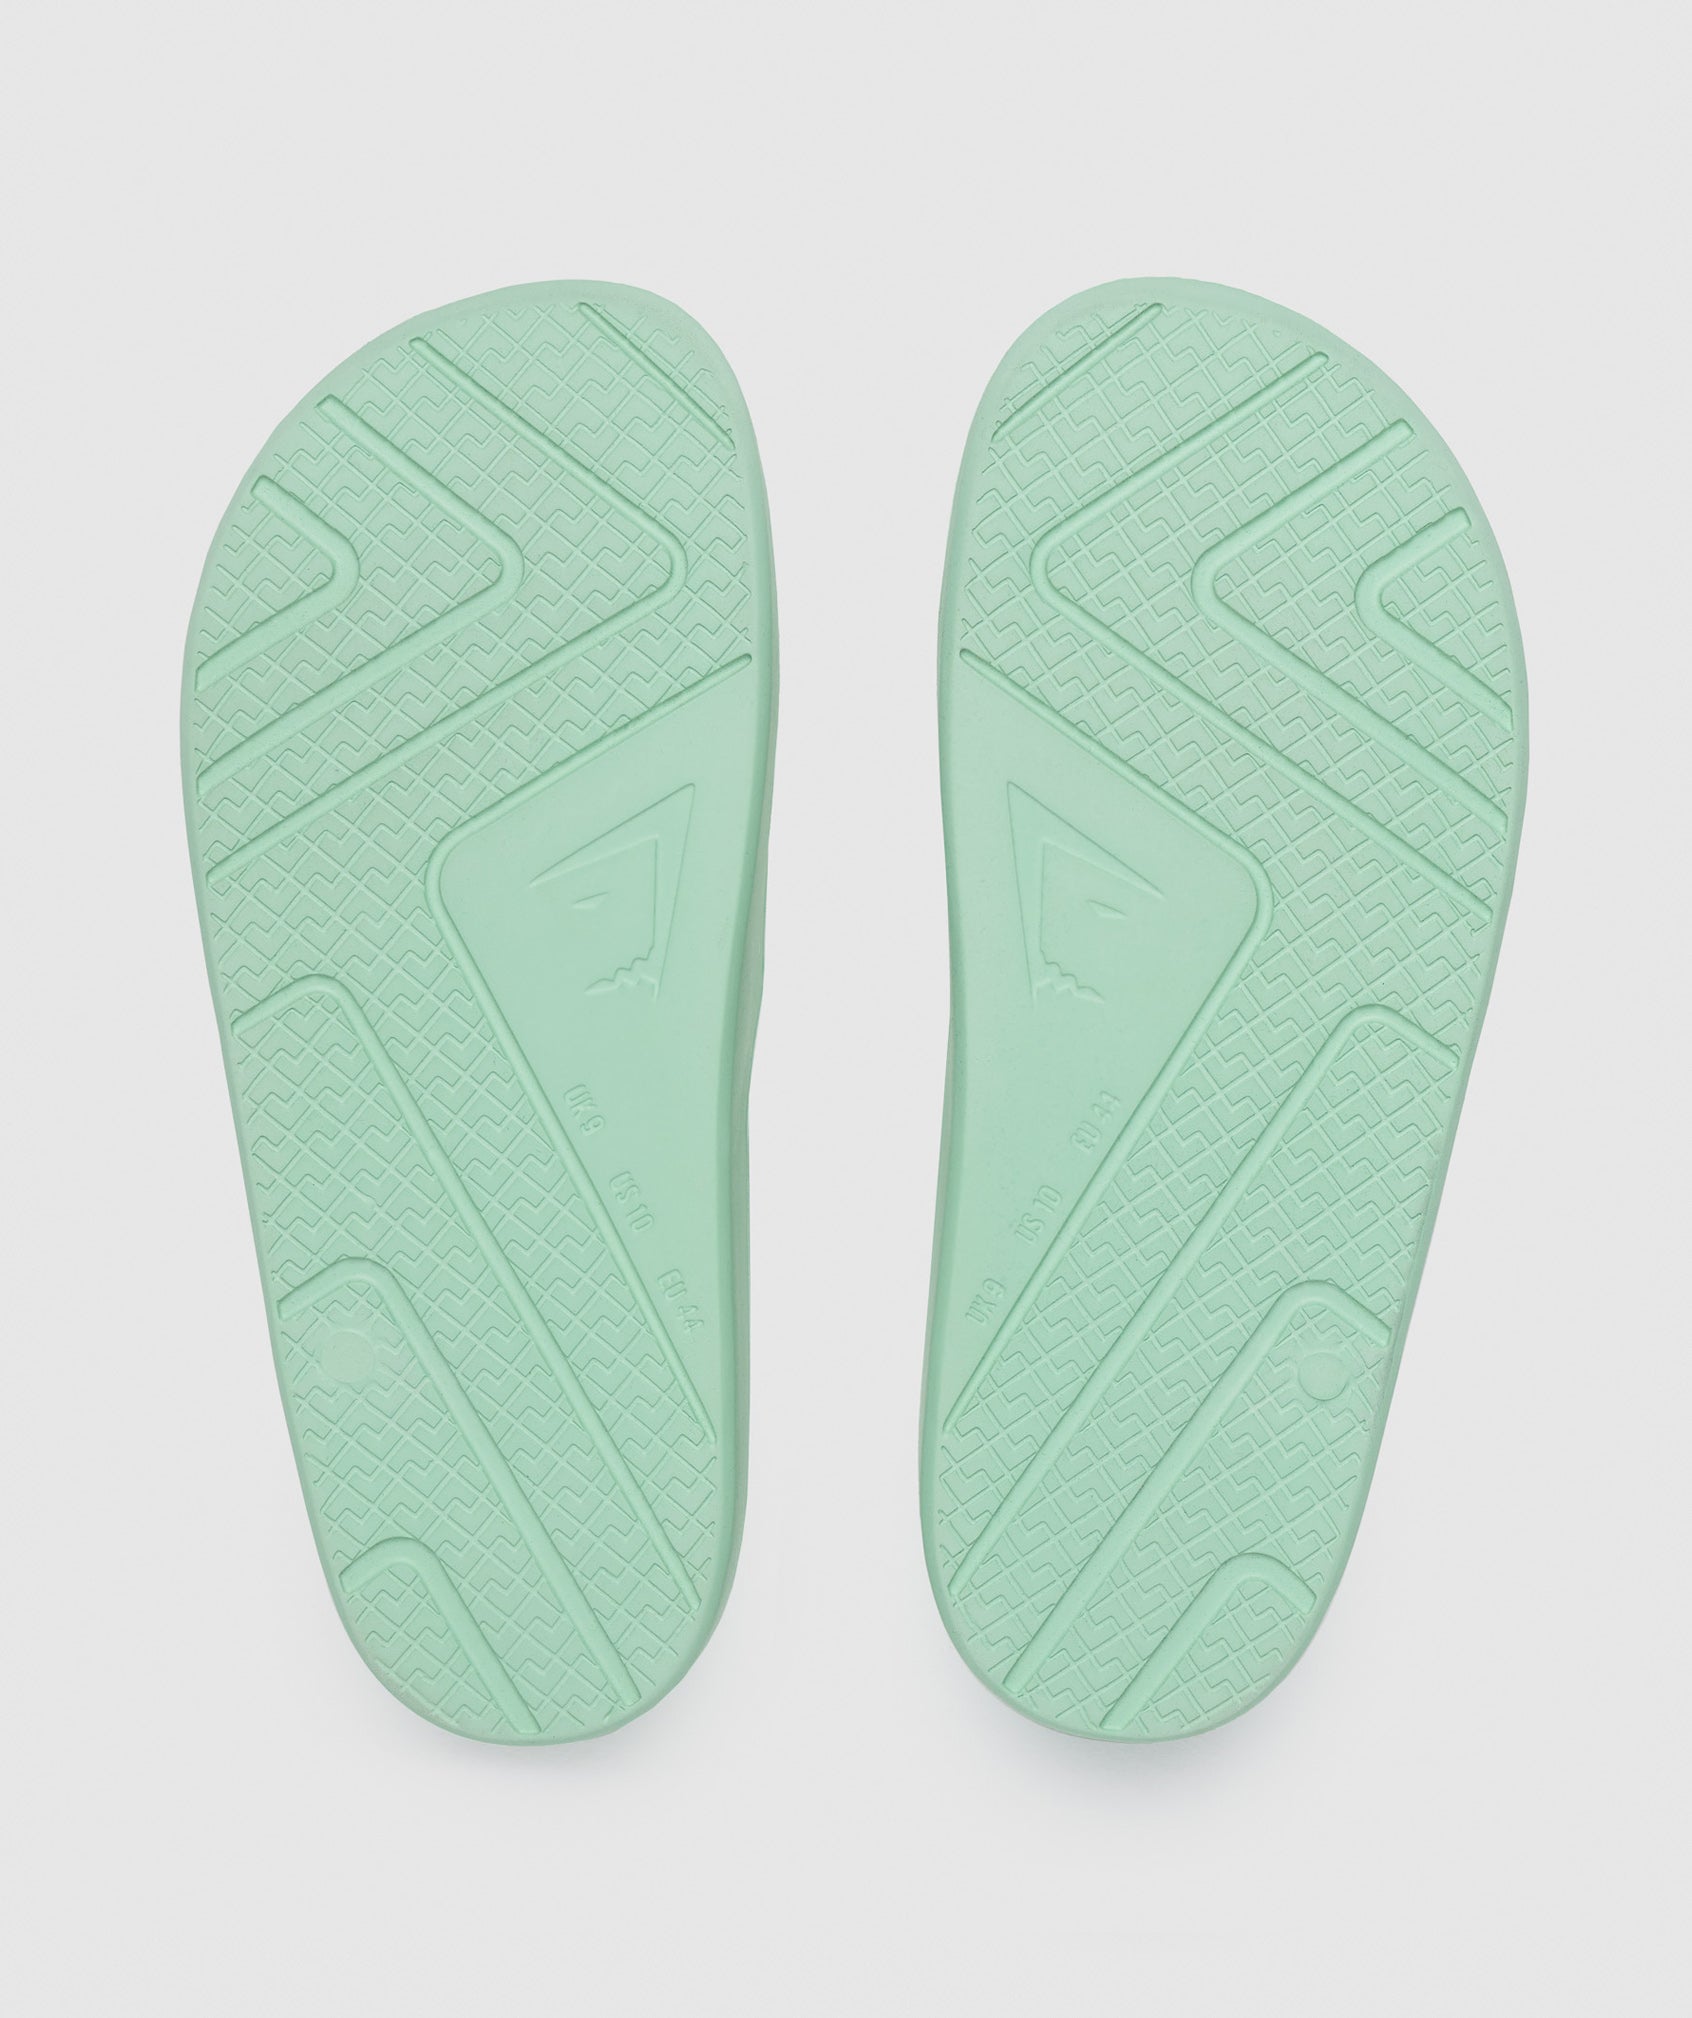 Rest Day Slides in Pastel Green - view 6